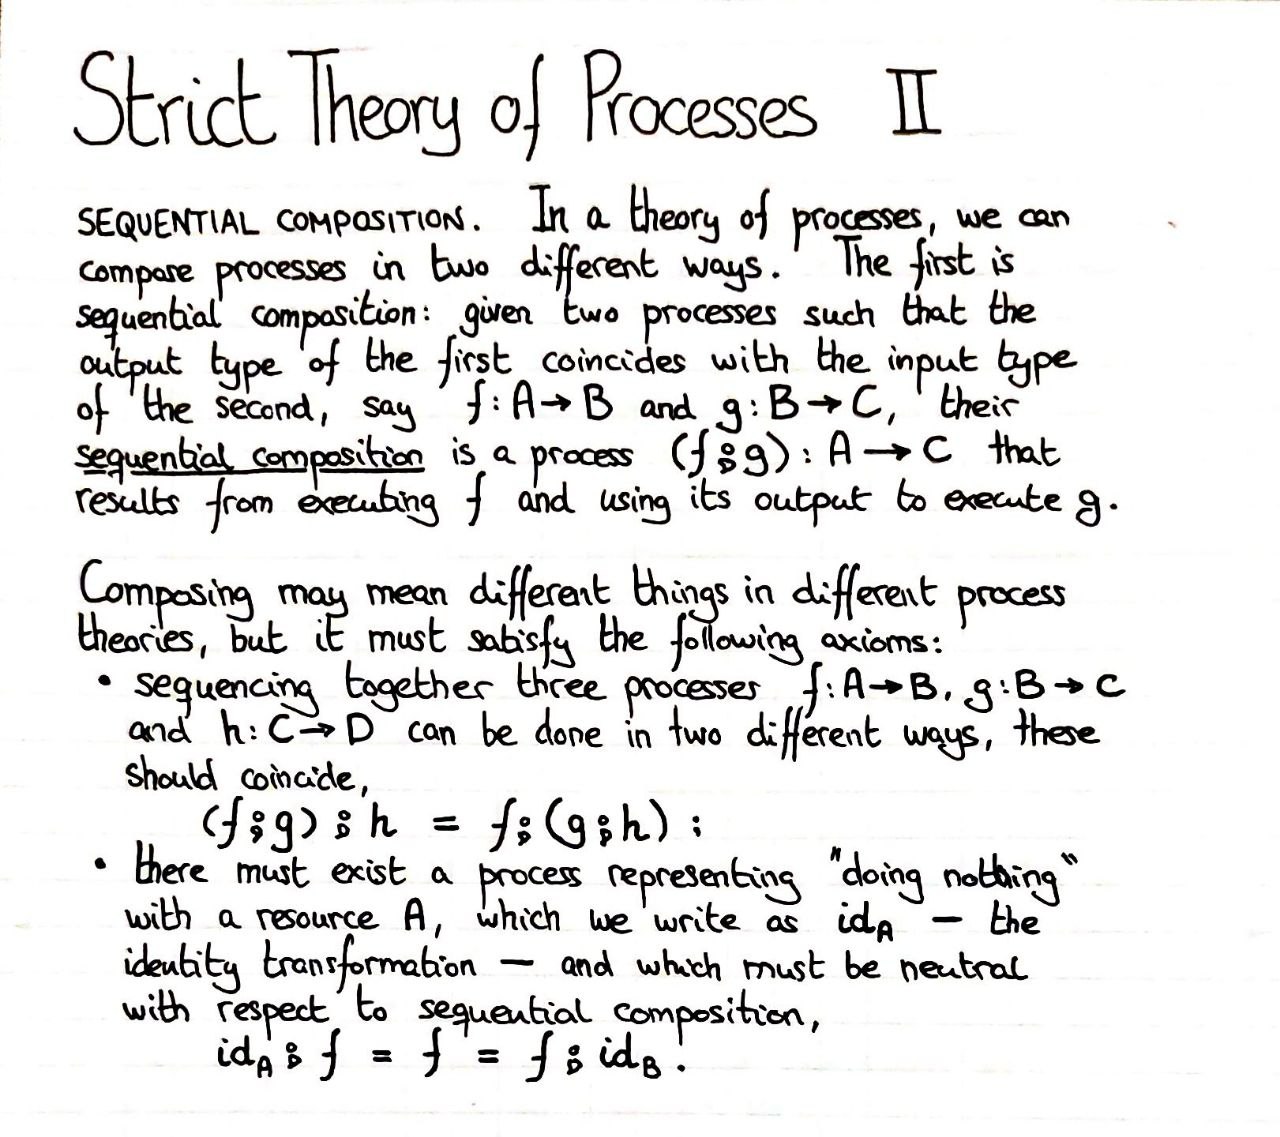 strict-theory-of-processes-ii